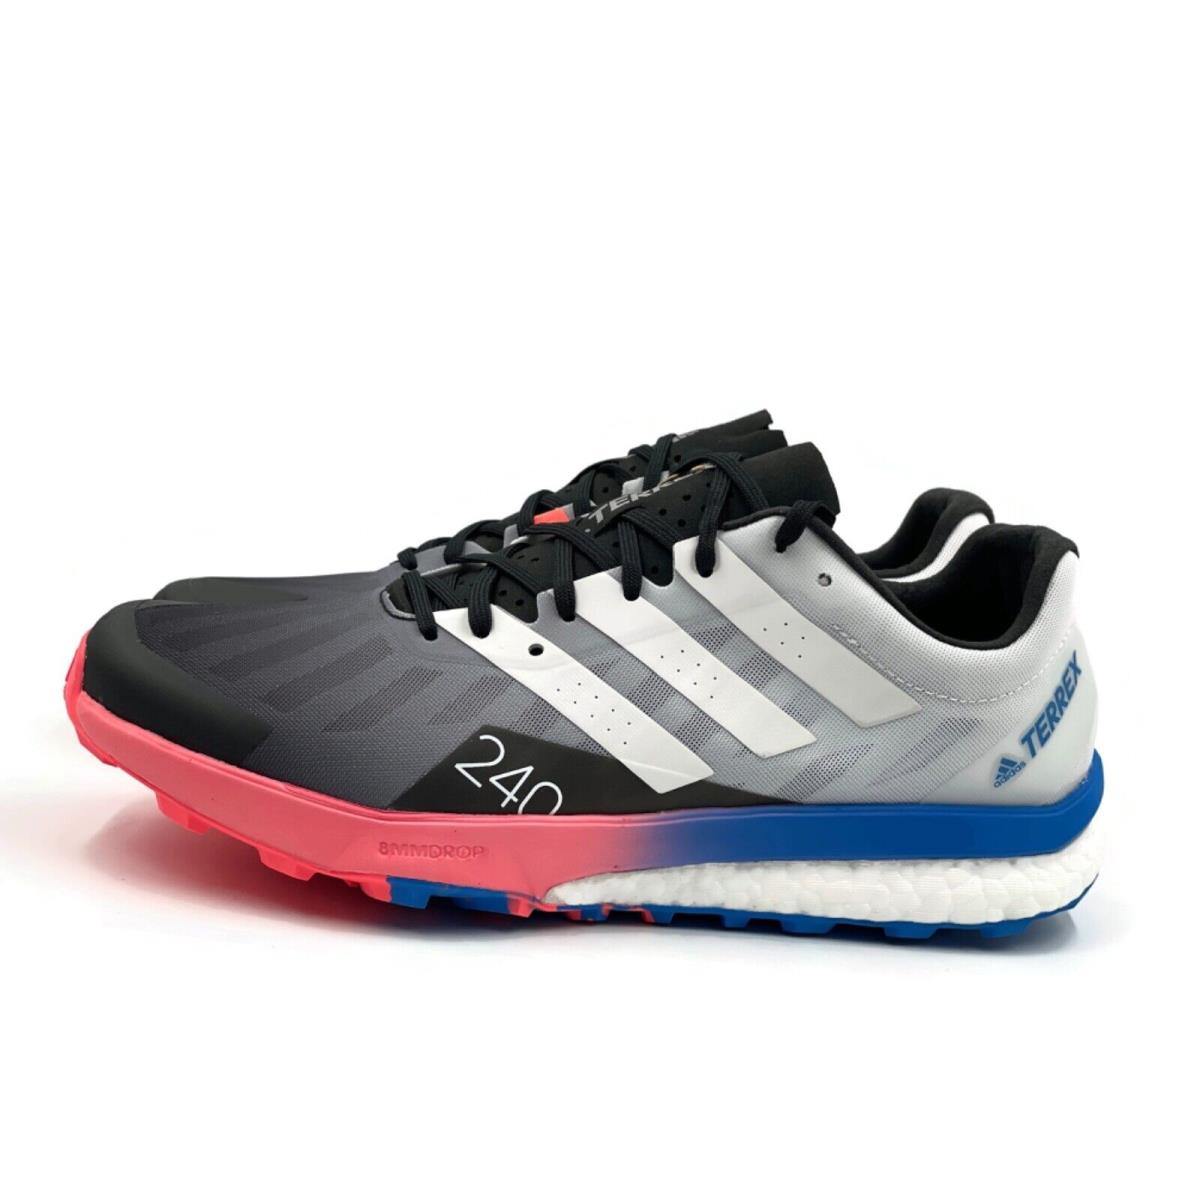 Adidas shoes TERREX Speed Ultra - Multicolor White Blue Red Black 6